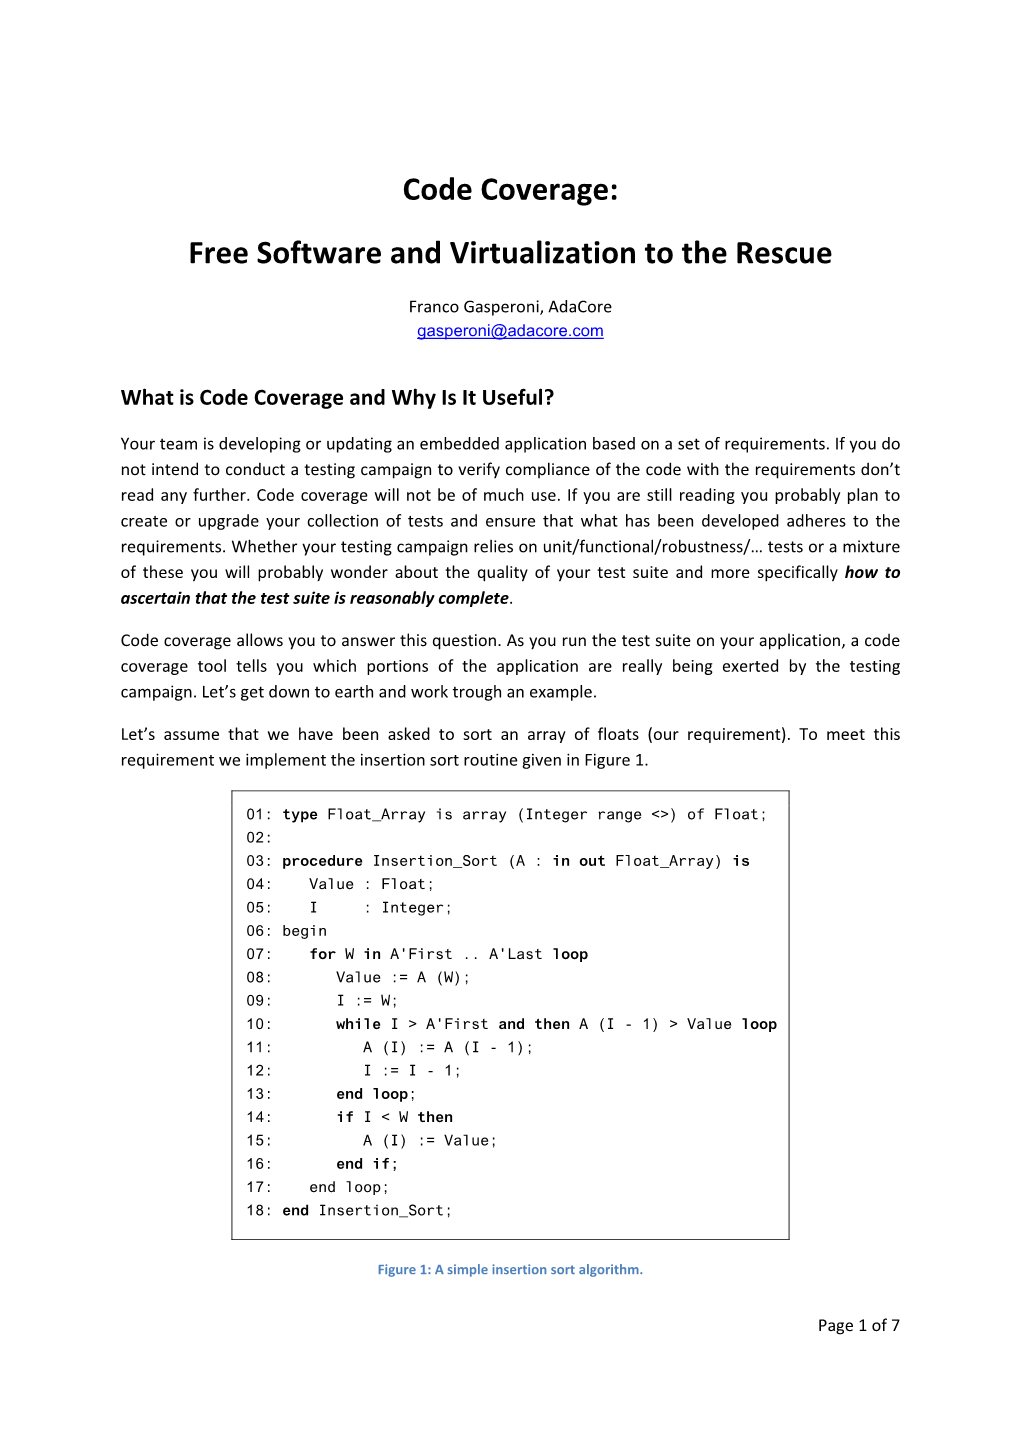 Code Coverage: Free Software and Virtualization to the Rescue